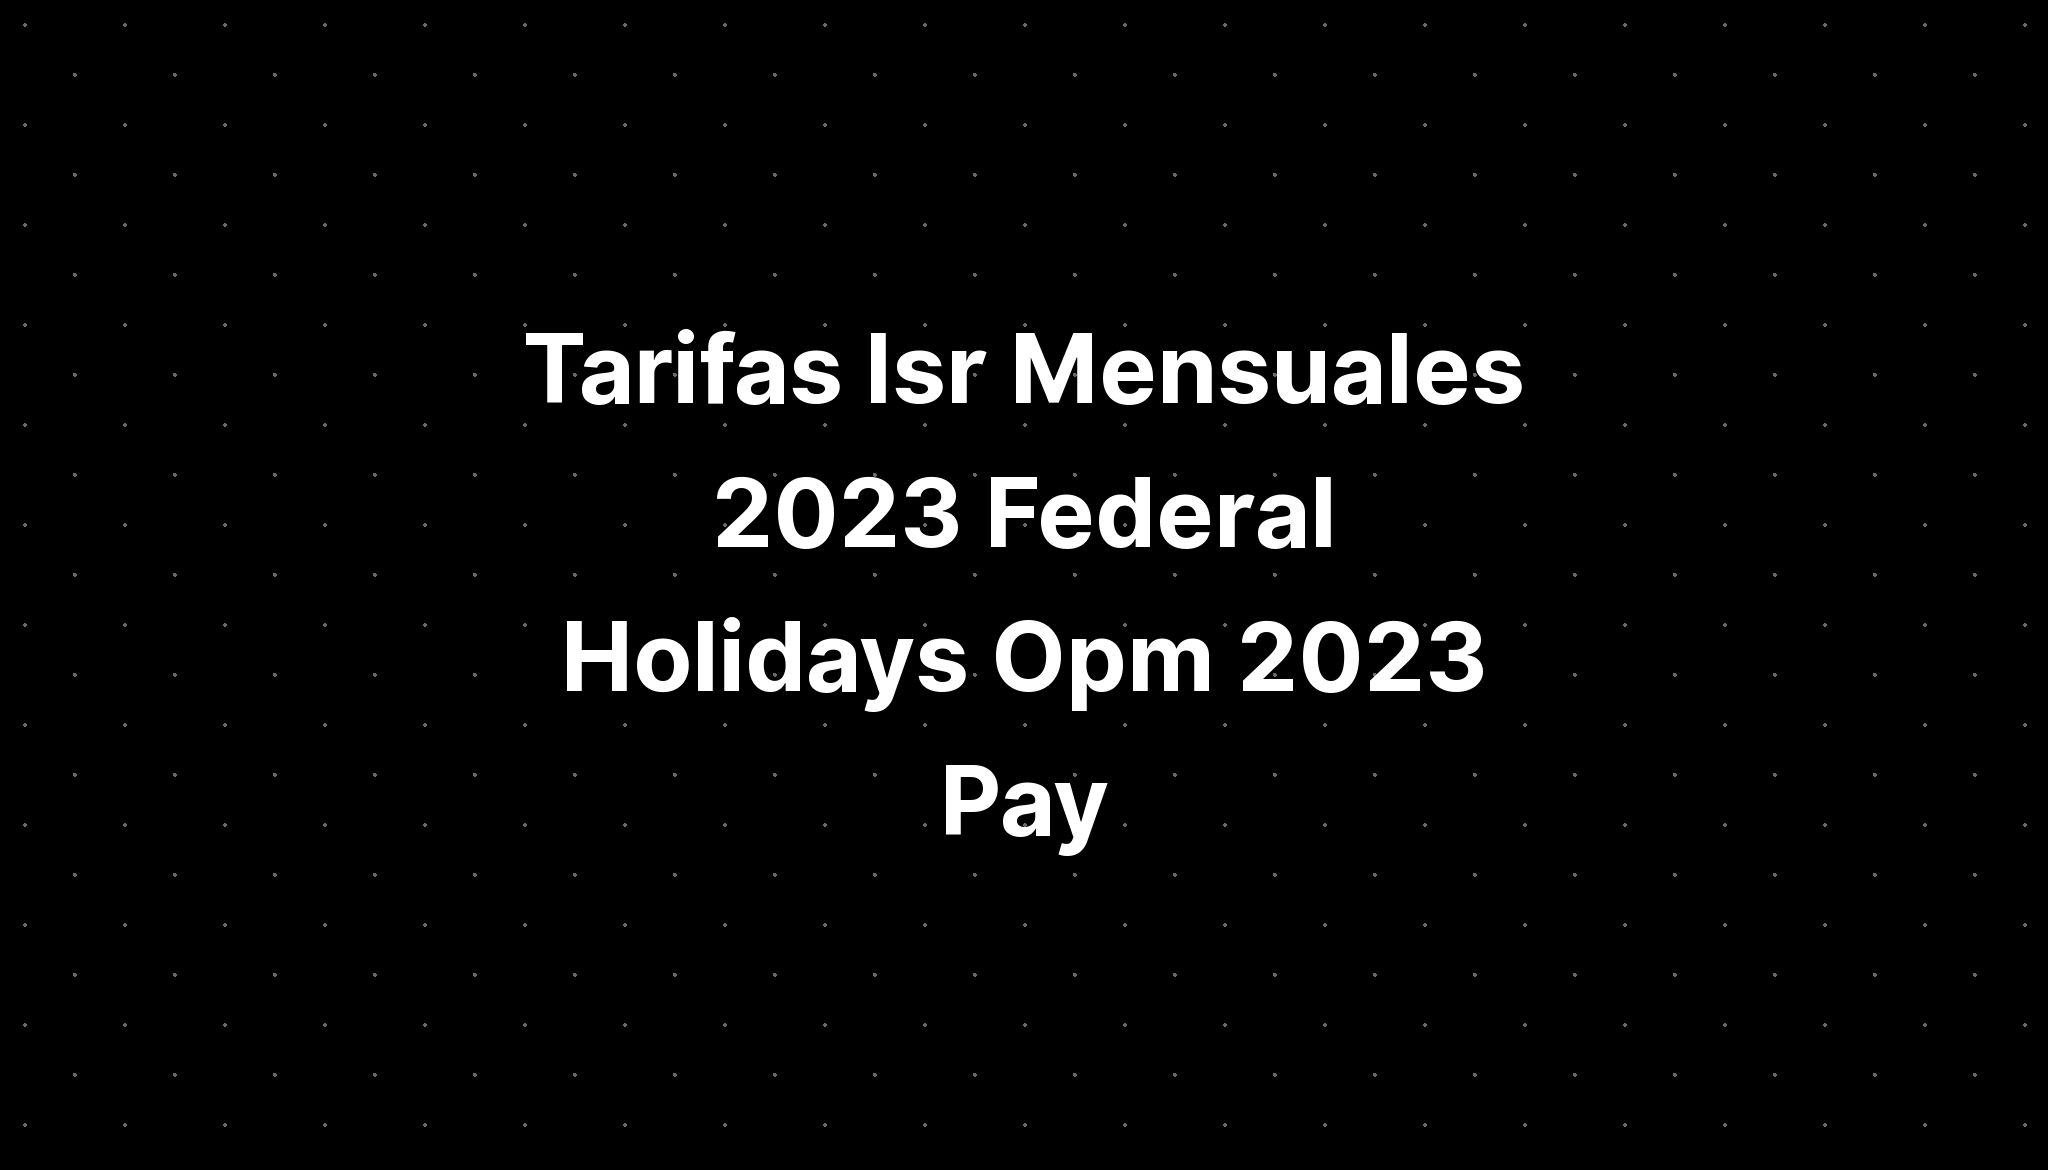 Tarifas Isr Mensuales 2023 Federal Holidays Schedule 2023 2024 IMAGESEE